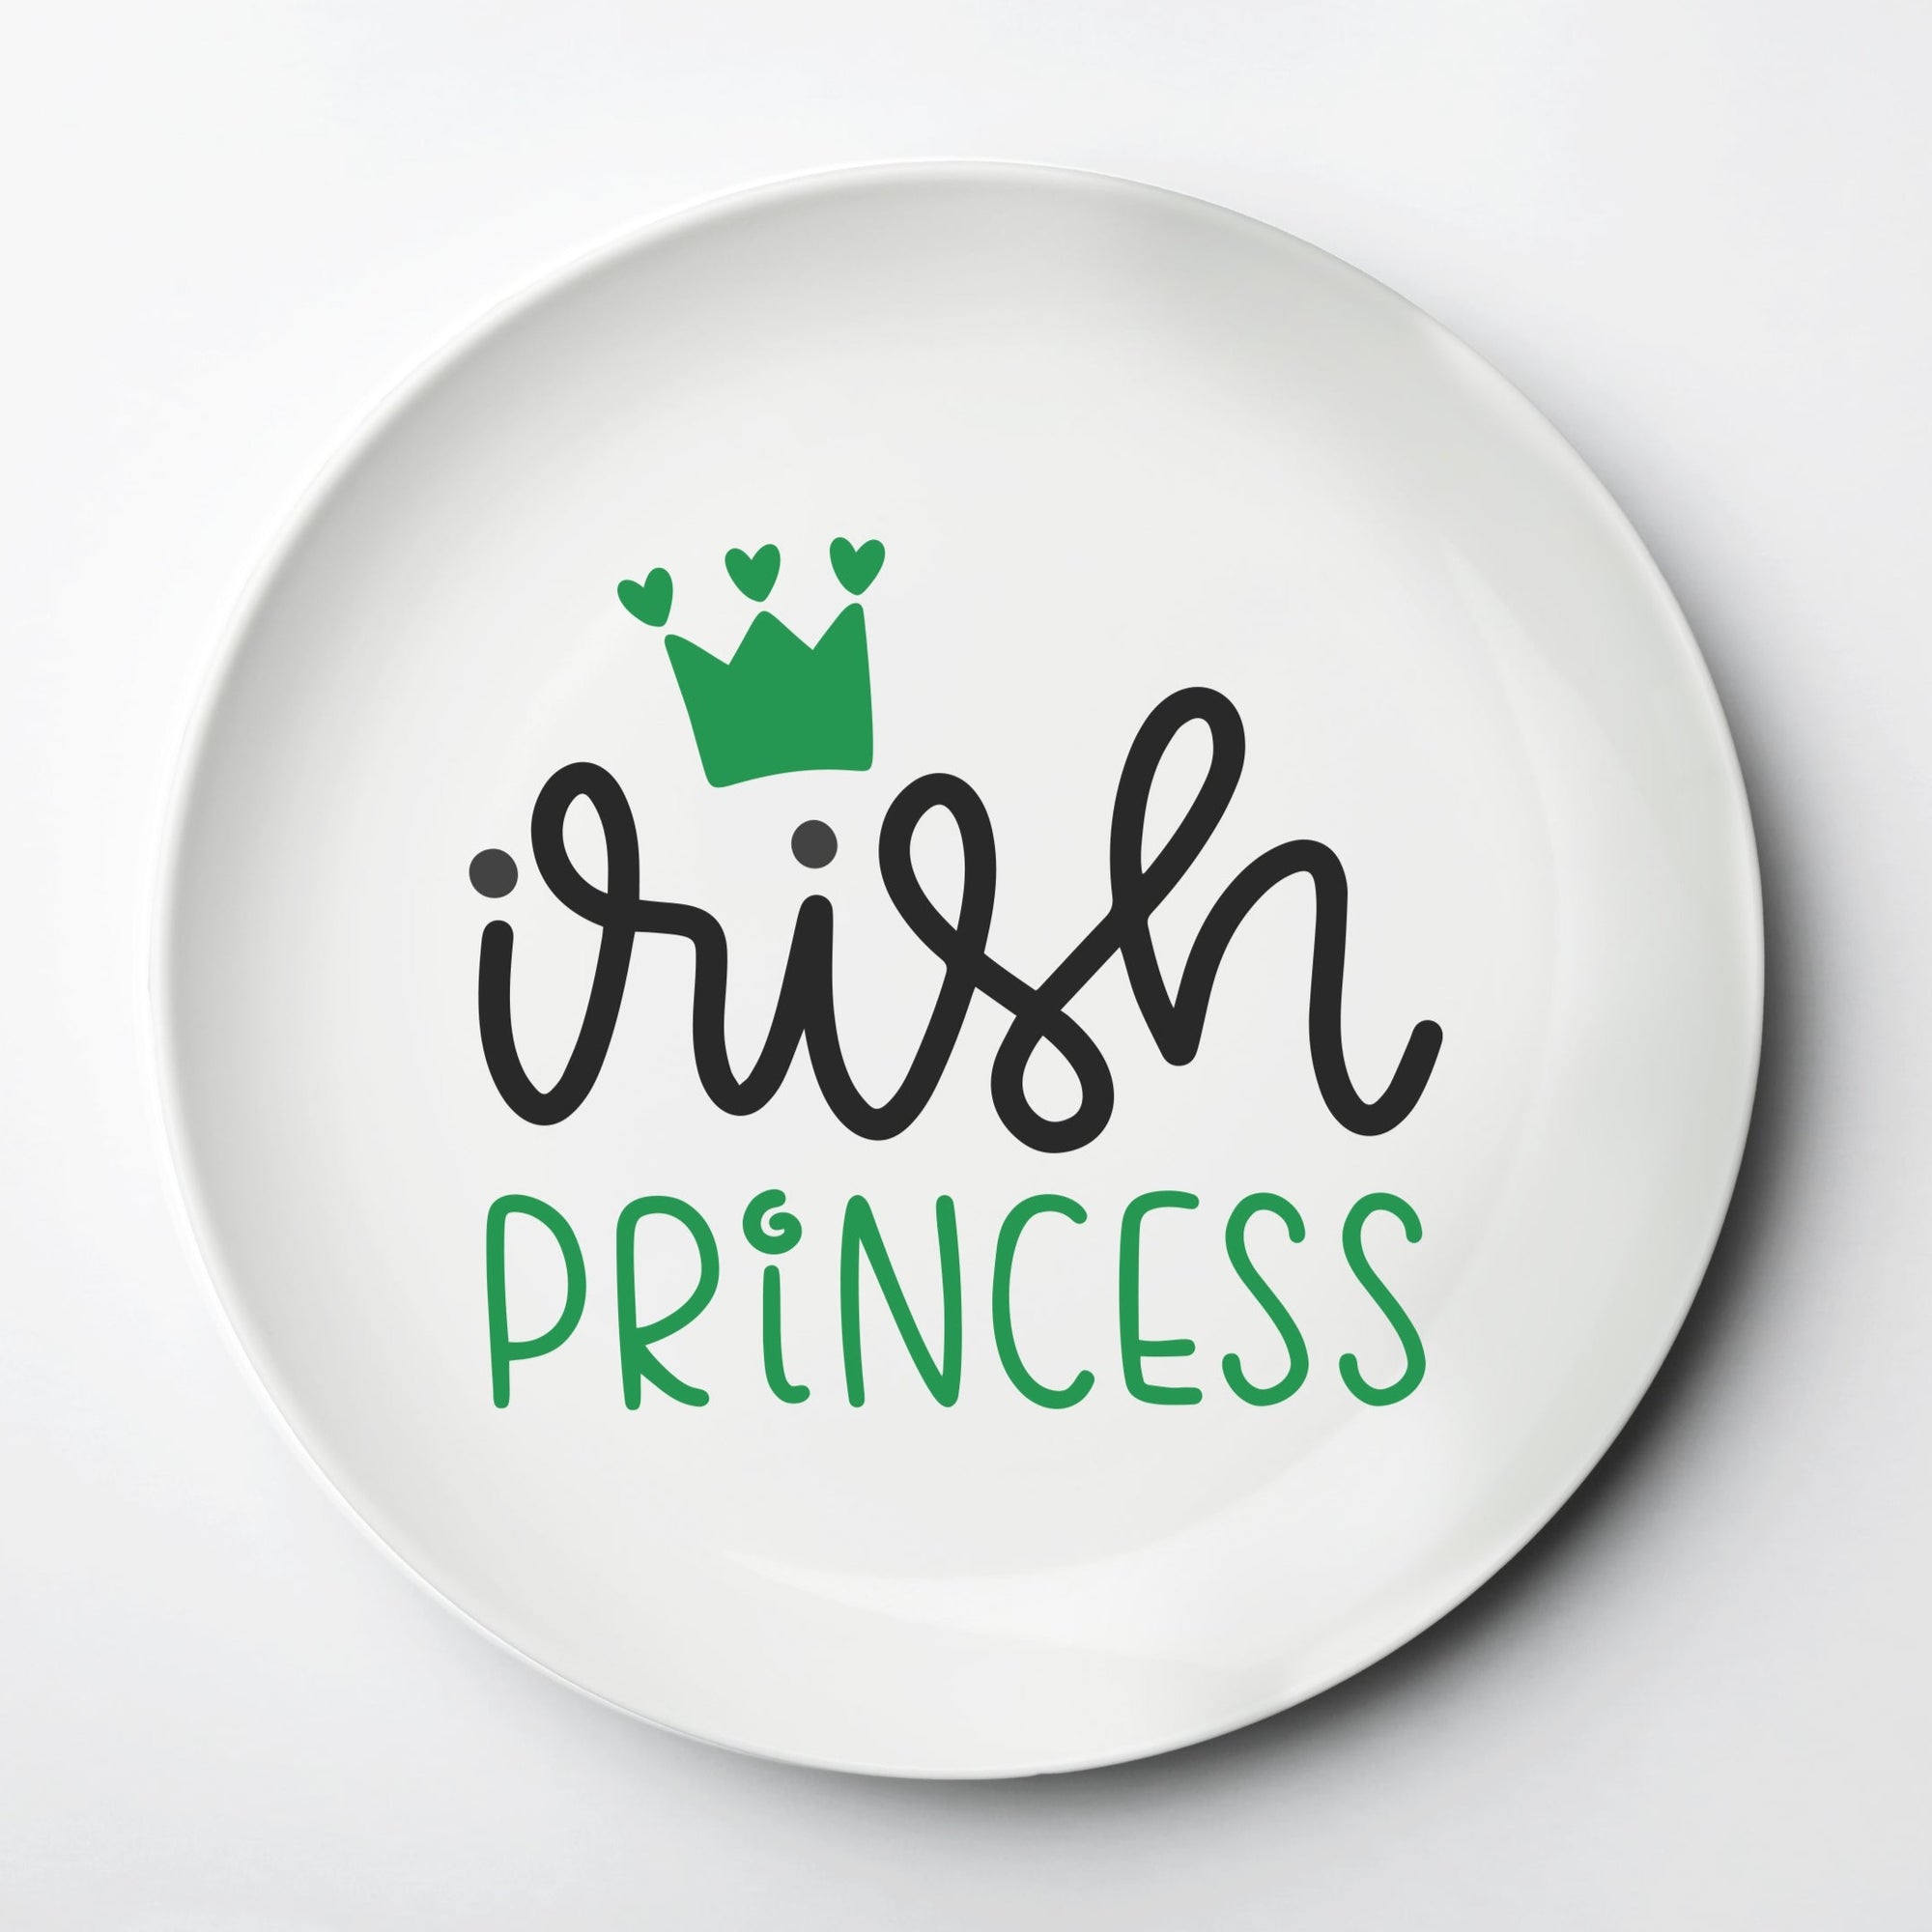 Irish Princess, ThermoSāf® kids reusable plate, microwave, dishwasher and oven safe.  Made in the USA, Pipsy.com